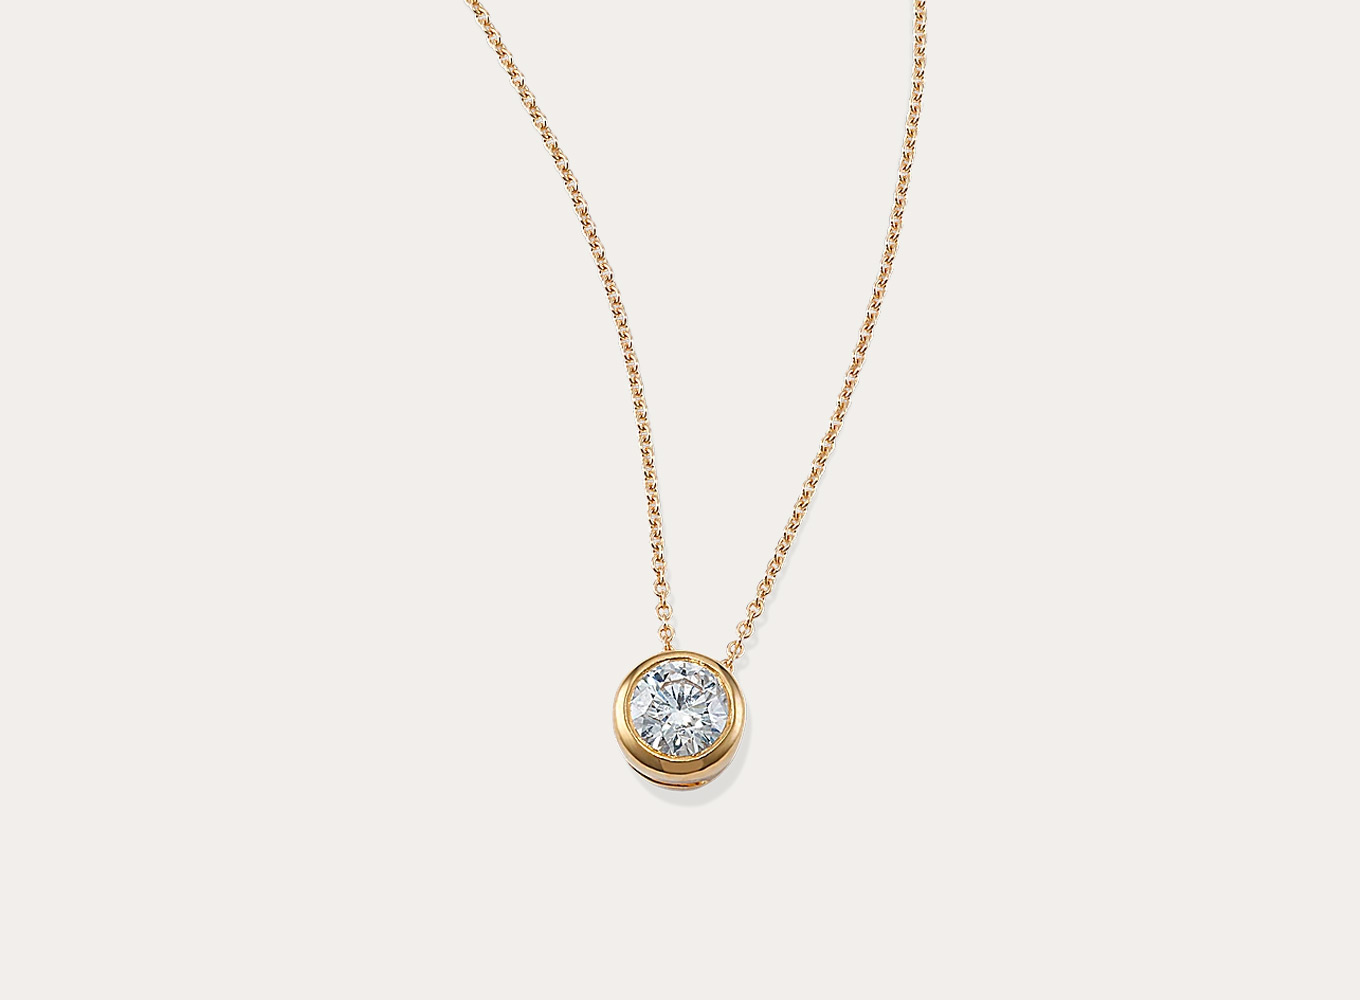 Round 1/3 ctw Lab-Grown Diamond Bezel Pendant This sparkling round lab-grown diamond pendant features a stylish bezel setting. Crafted in warm 14-karat yellow gold, a matching cable chain with a lobster clasp keeps this necklace secure.